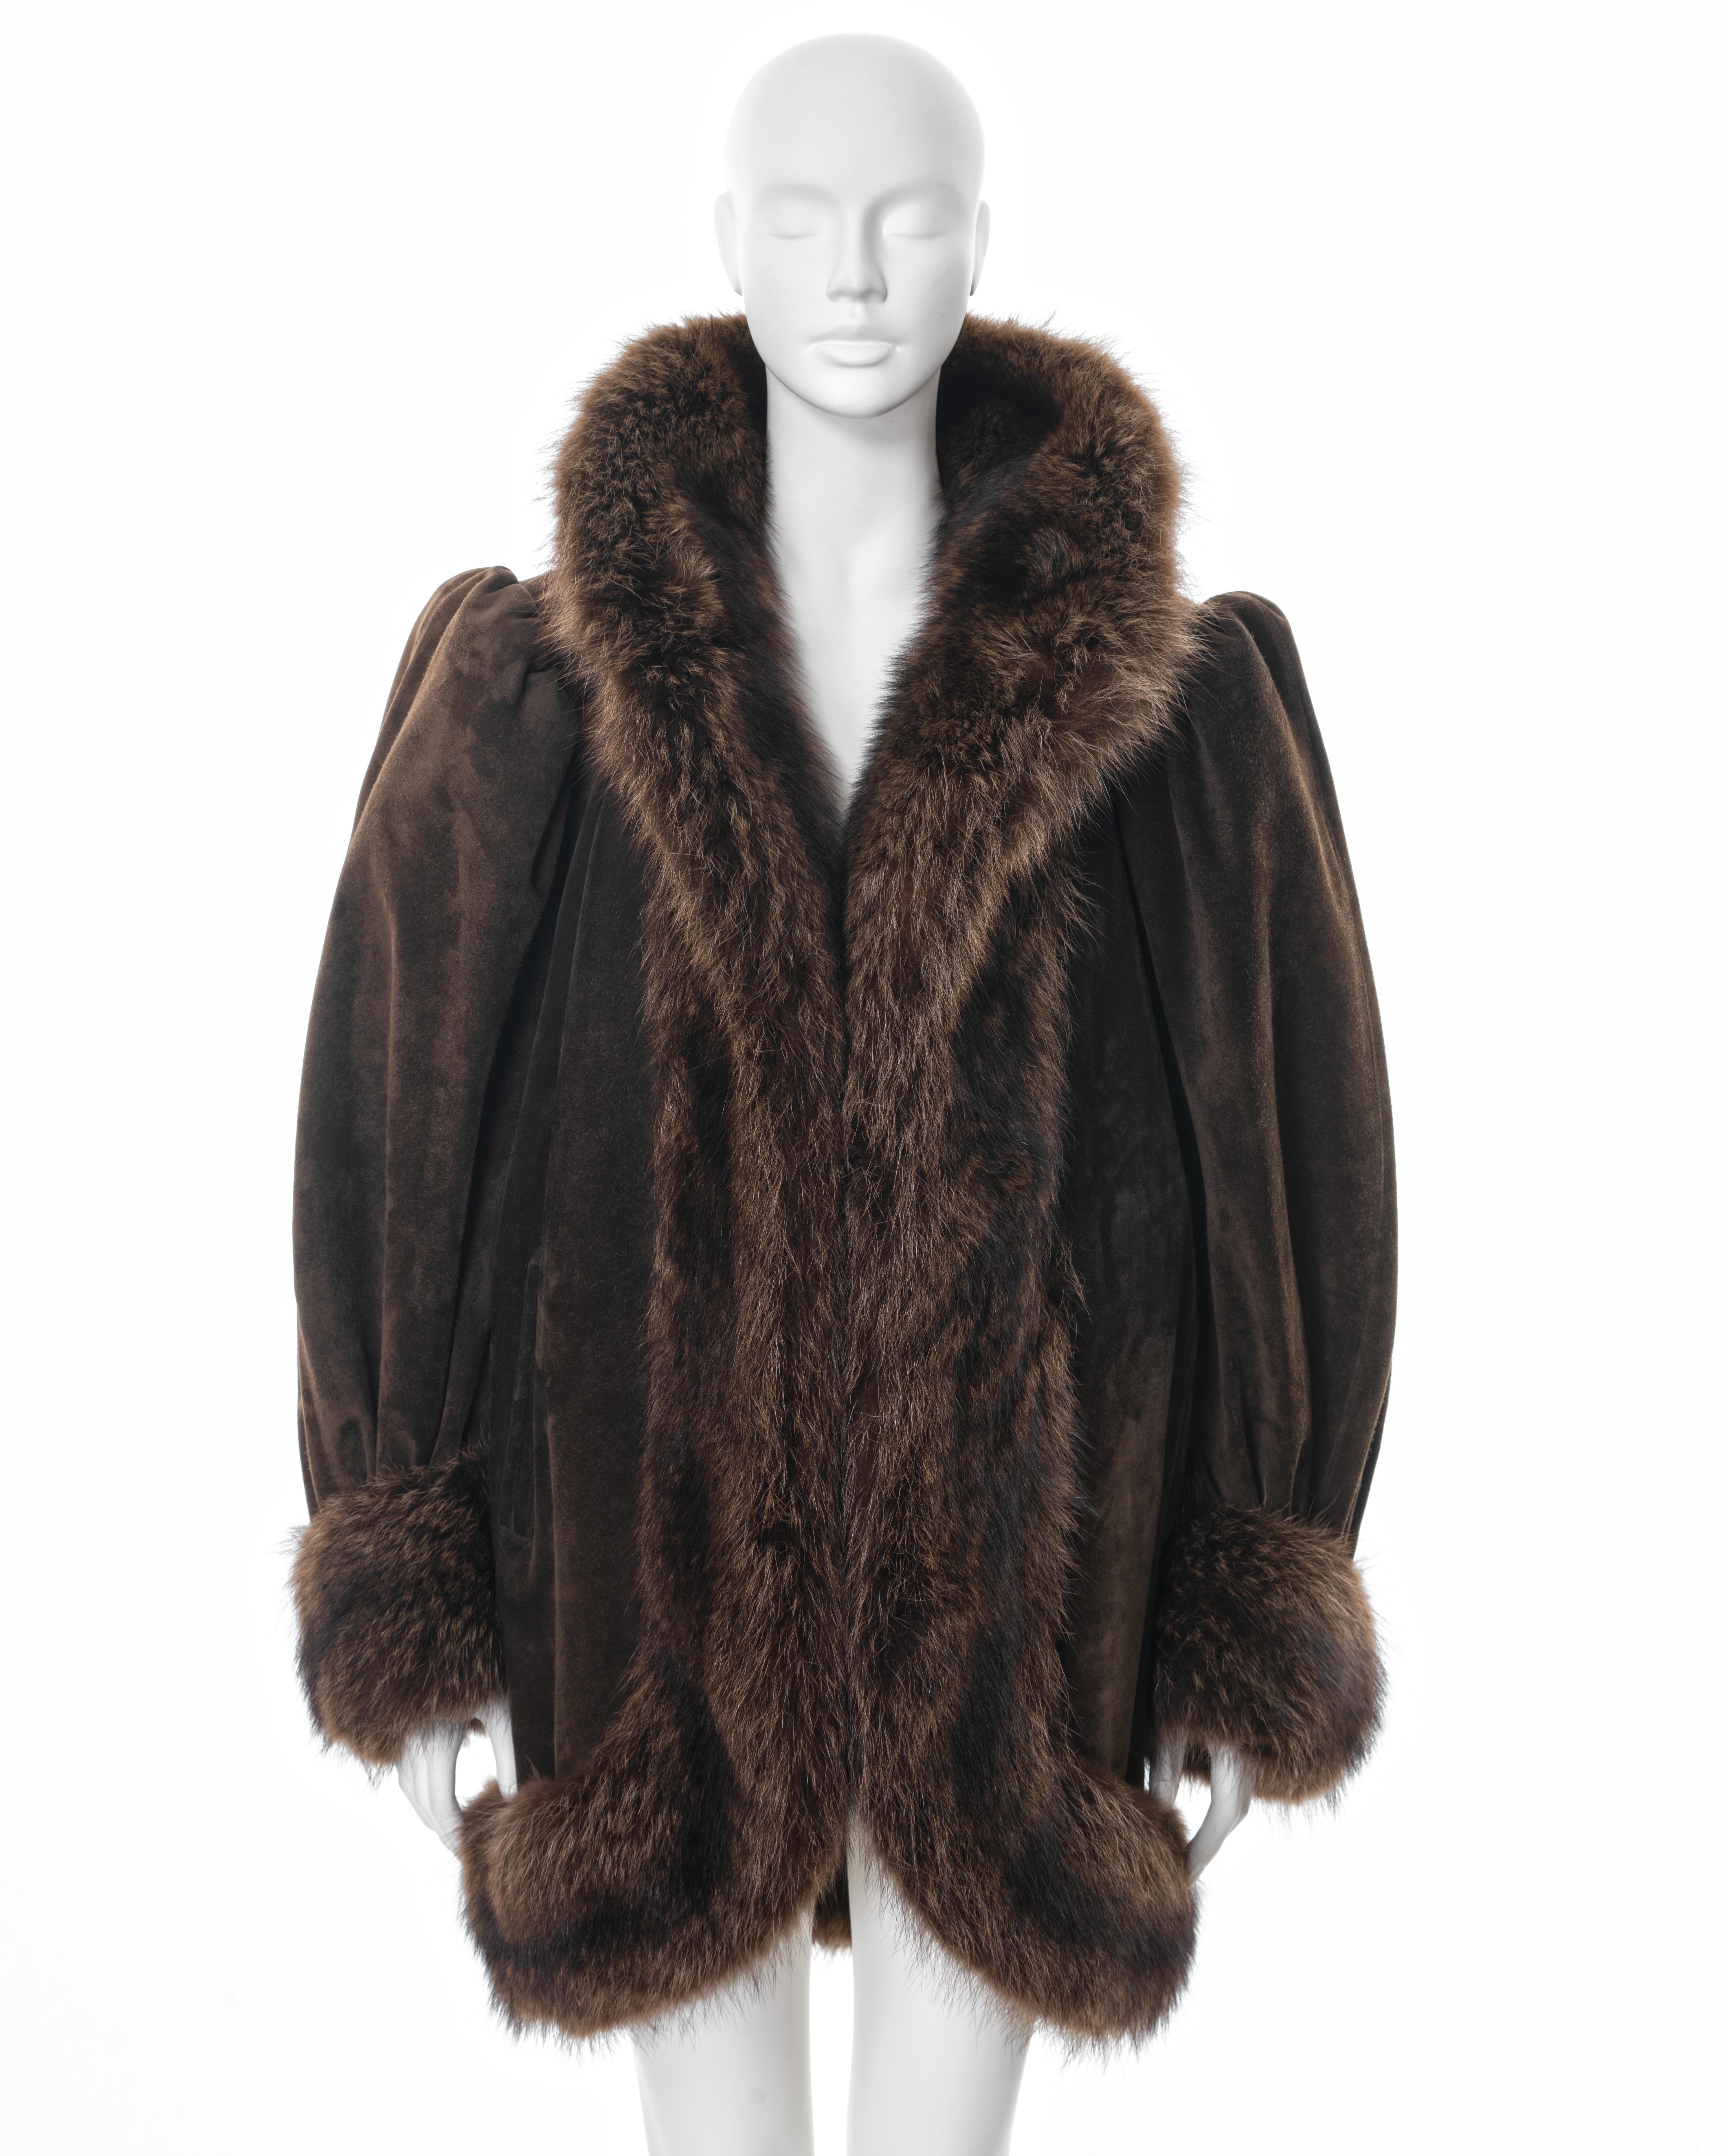 ▪ Yves Saint Laurent Haute Couture cocoon coat
▪ Fall-Winter 1983 
▪ Constructed from brown suede 
▪ Beaver fur trim 
▪ Oversized fit 
▪ Structured shoulders 
▪ Silk lining 
▪ Size approx. Medium 
▪ Made in France

All photographs in this listing